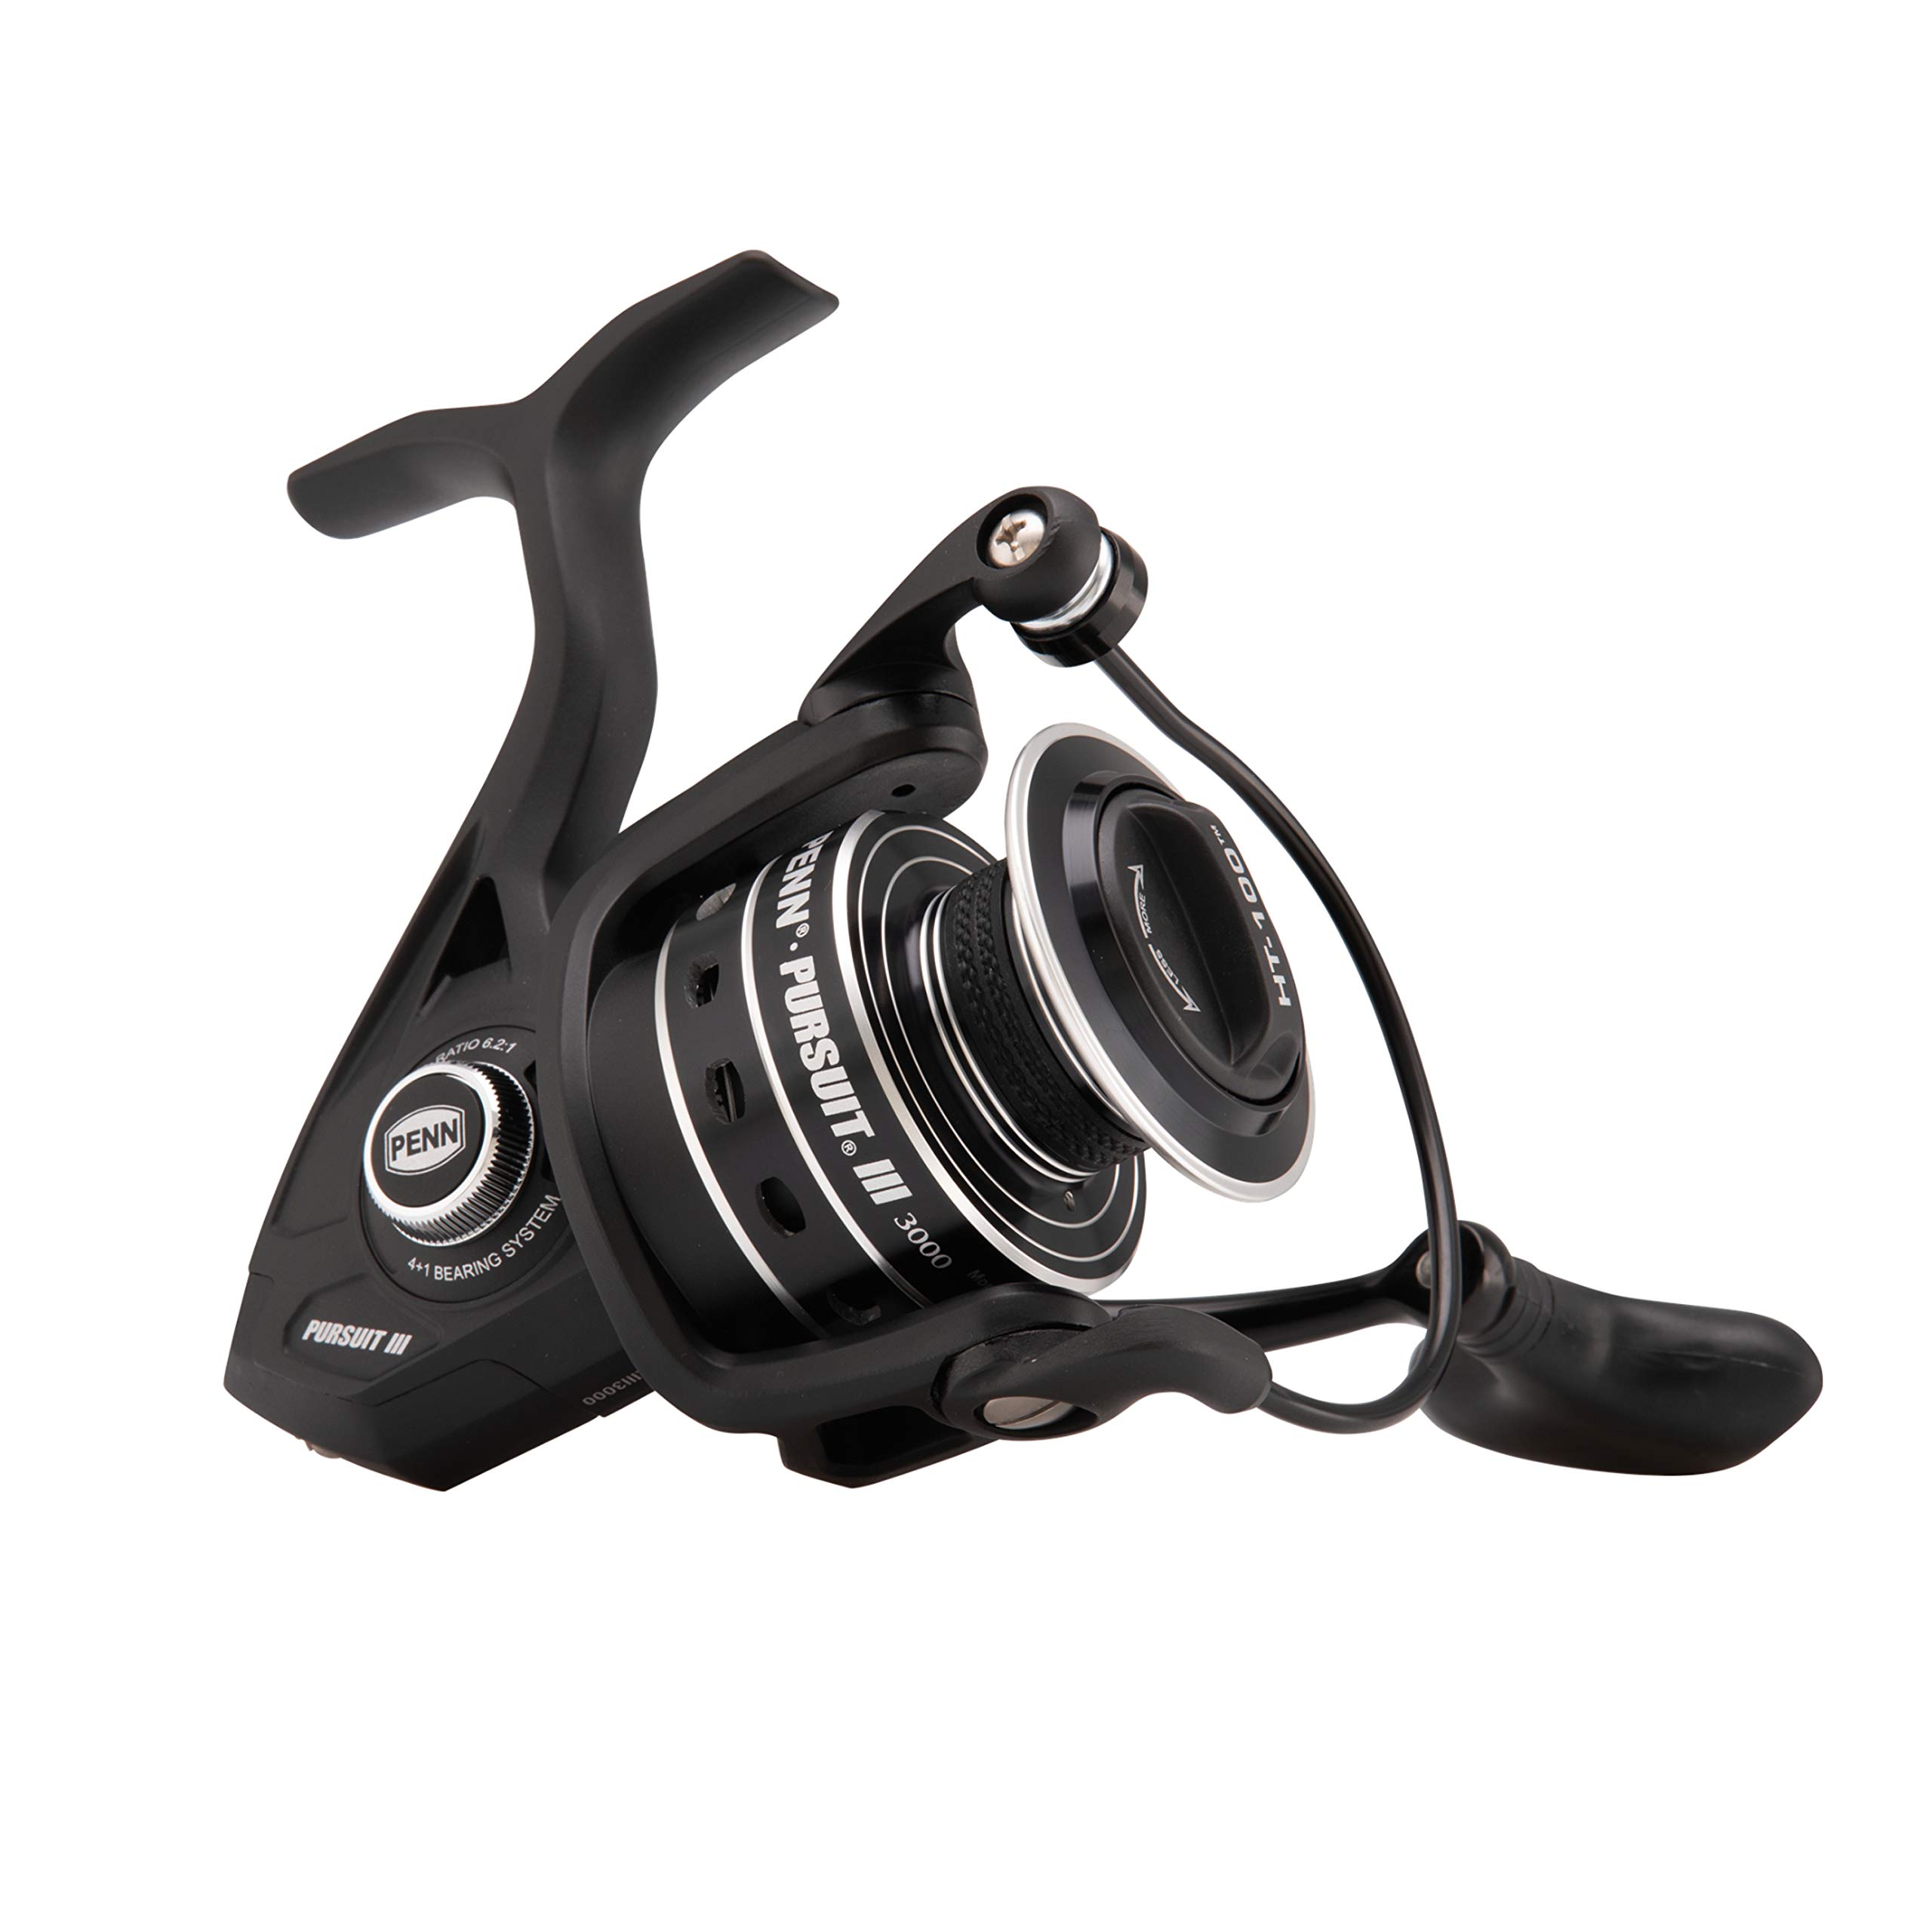 Penn Pursuit III Nearshore Spinning Fishing Reel, Size 5000,  Corrosion-Resistant Graphite Body and Line Capacity